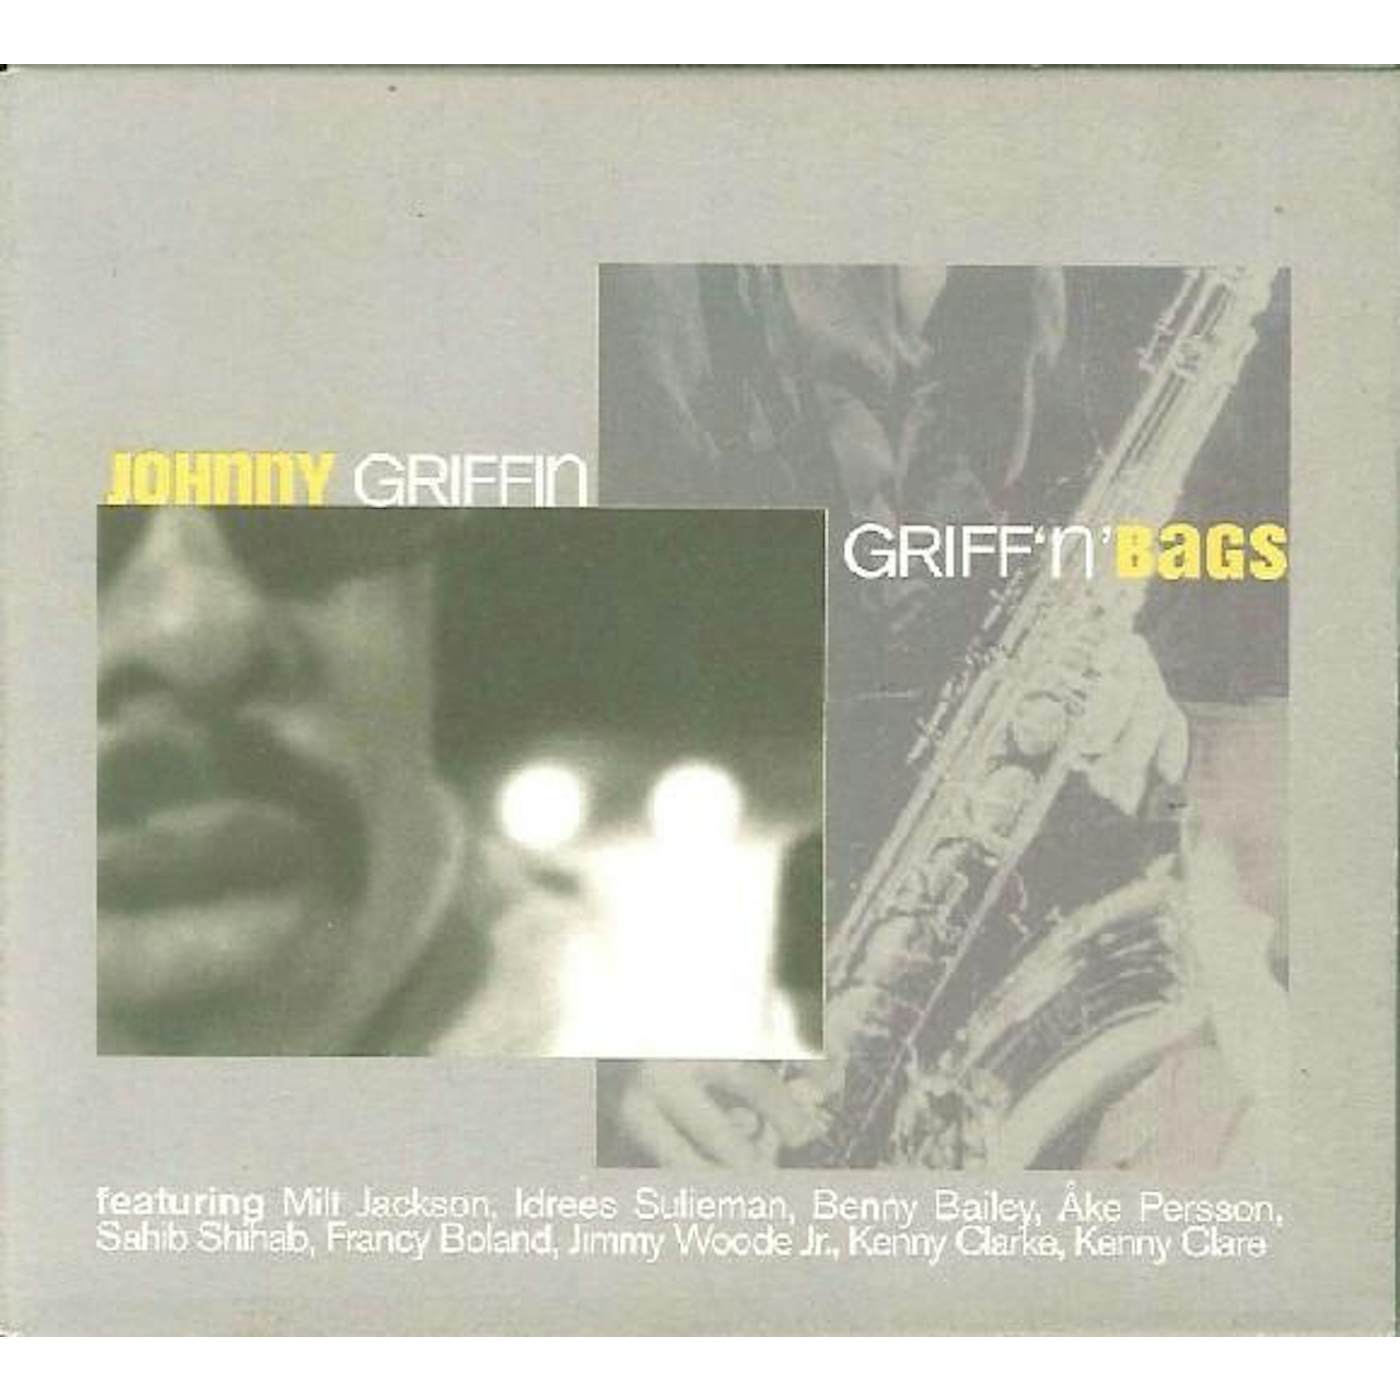 Johnny Griffin GRIFF N BAGS CD